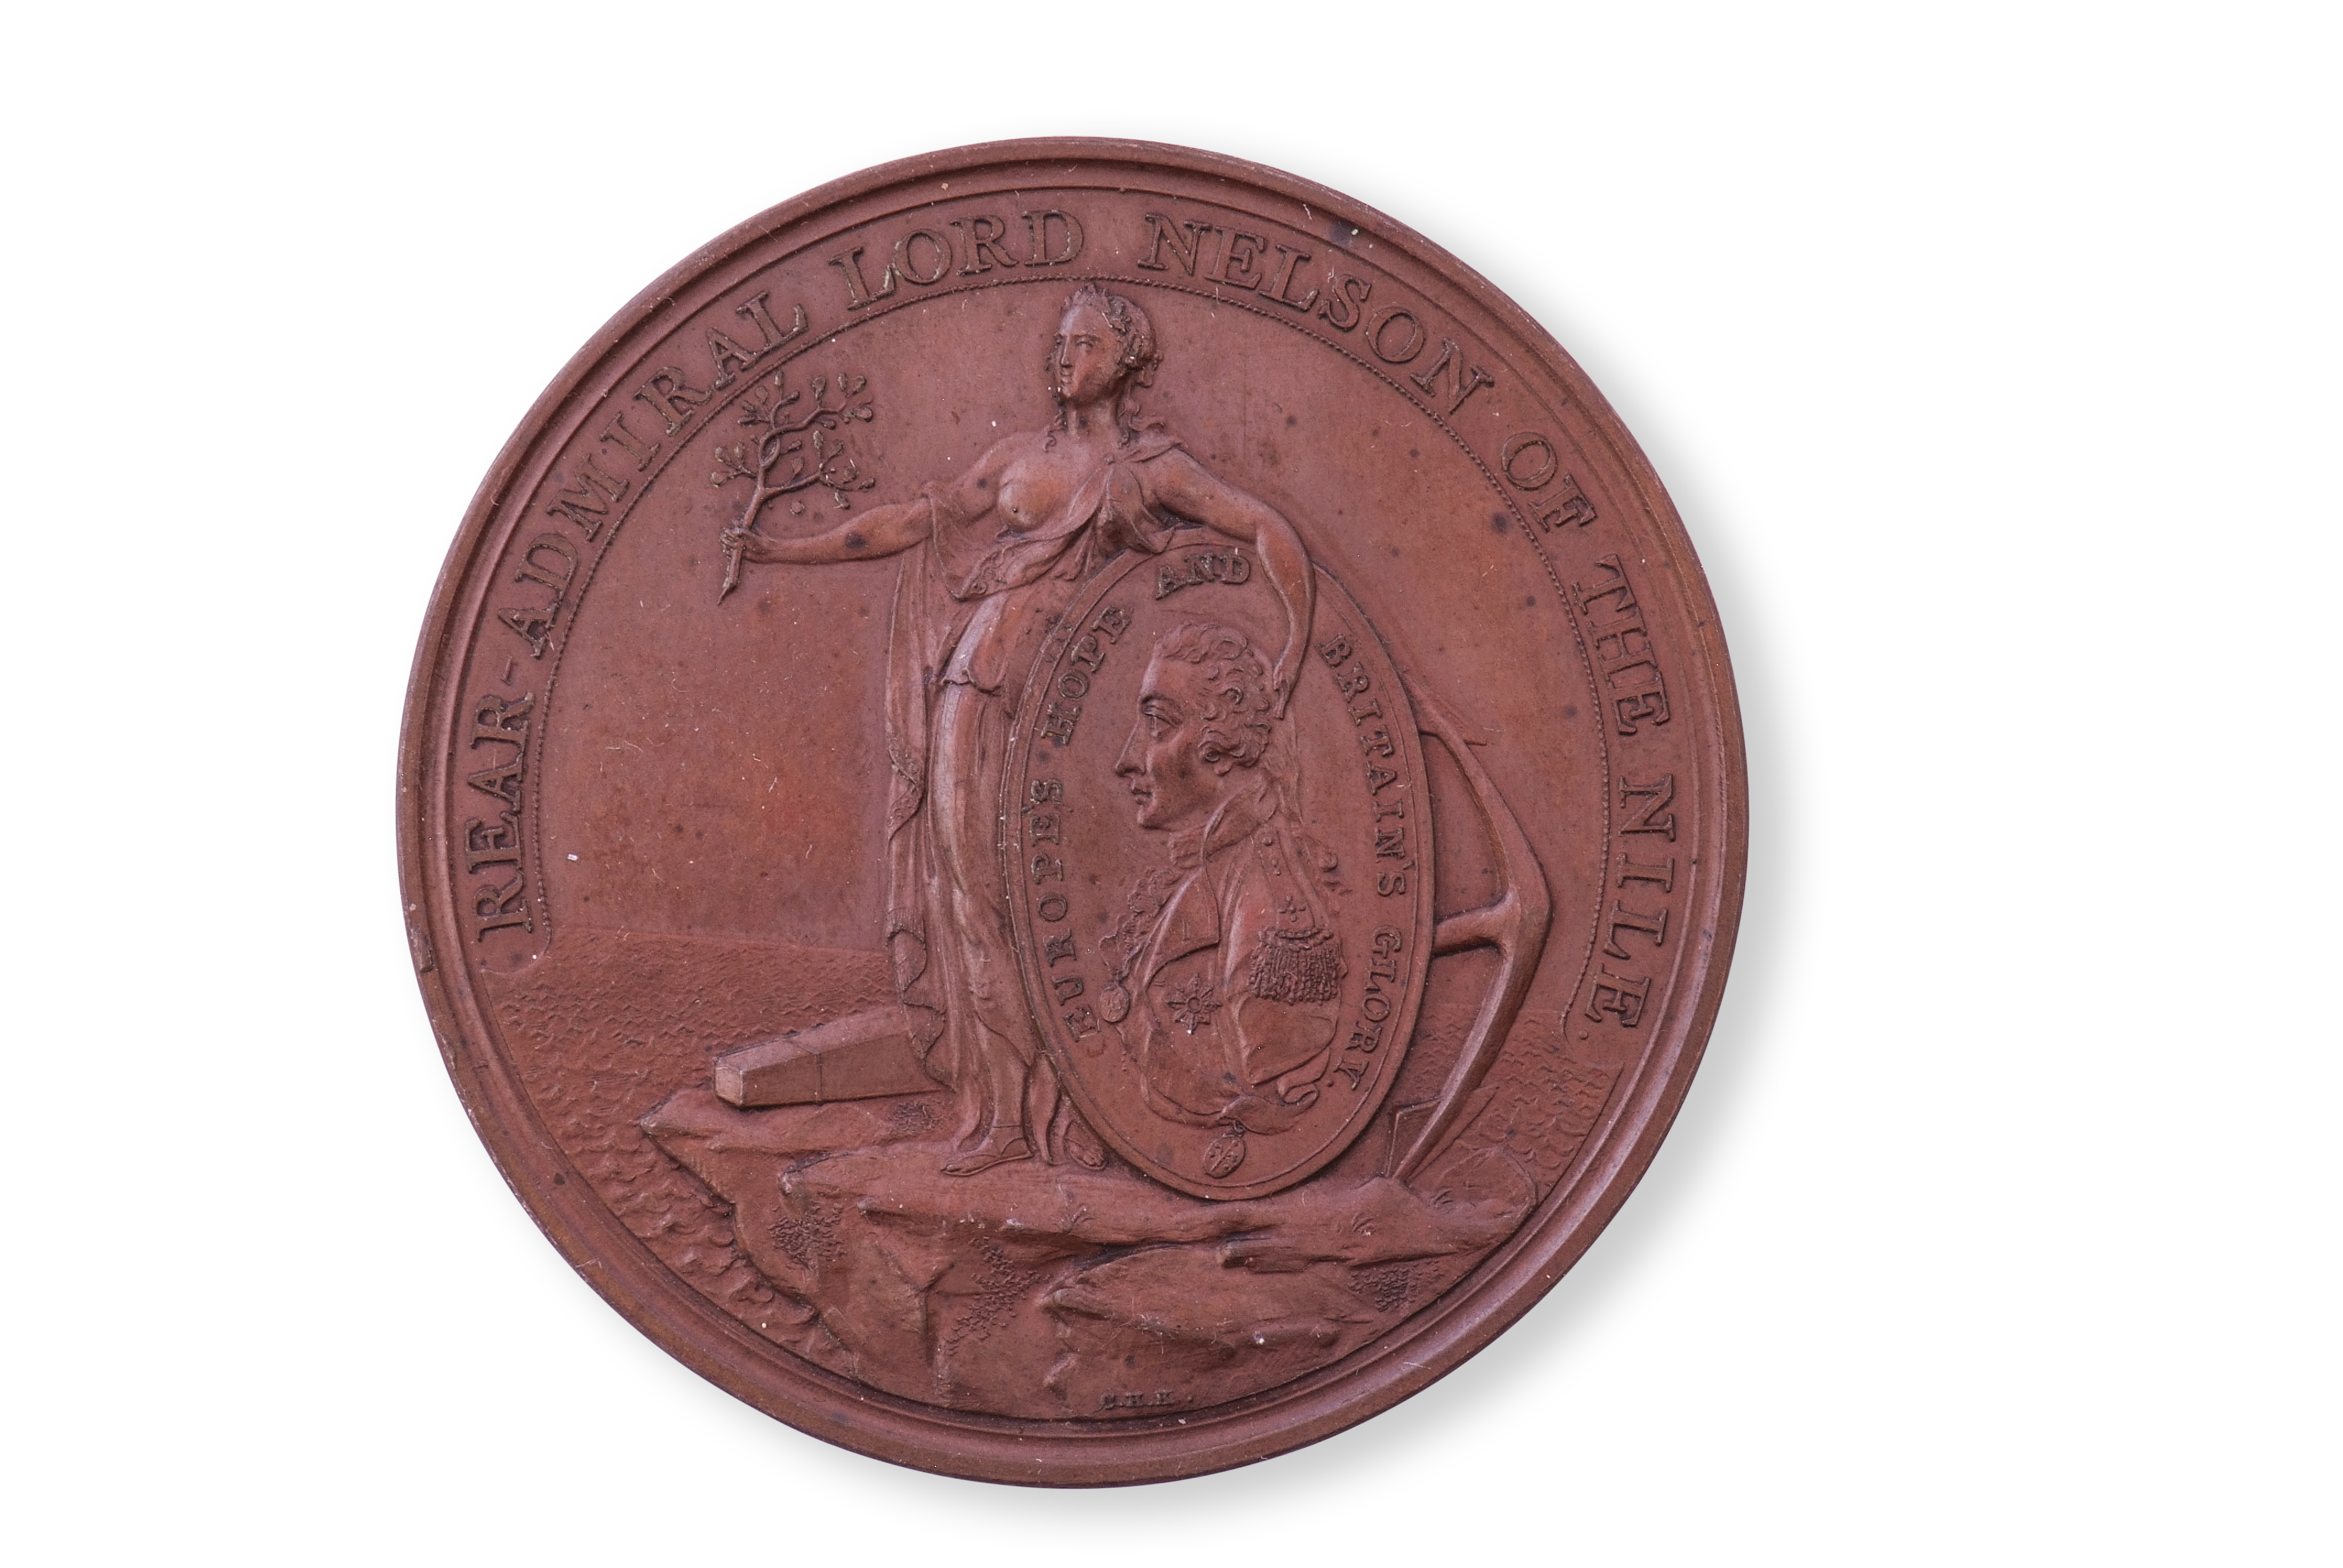 Davidson's Nile Medal, bronze, as issued to ratings, 47mm